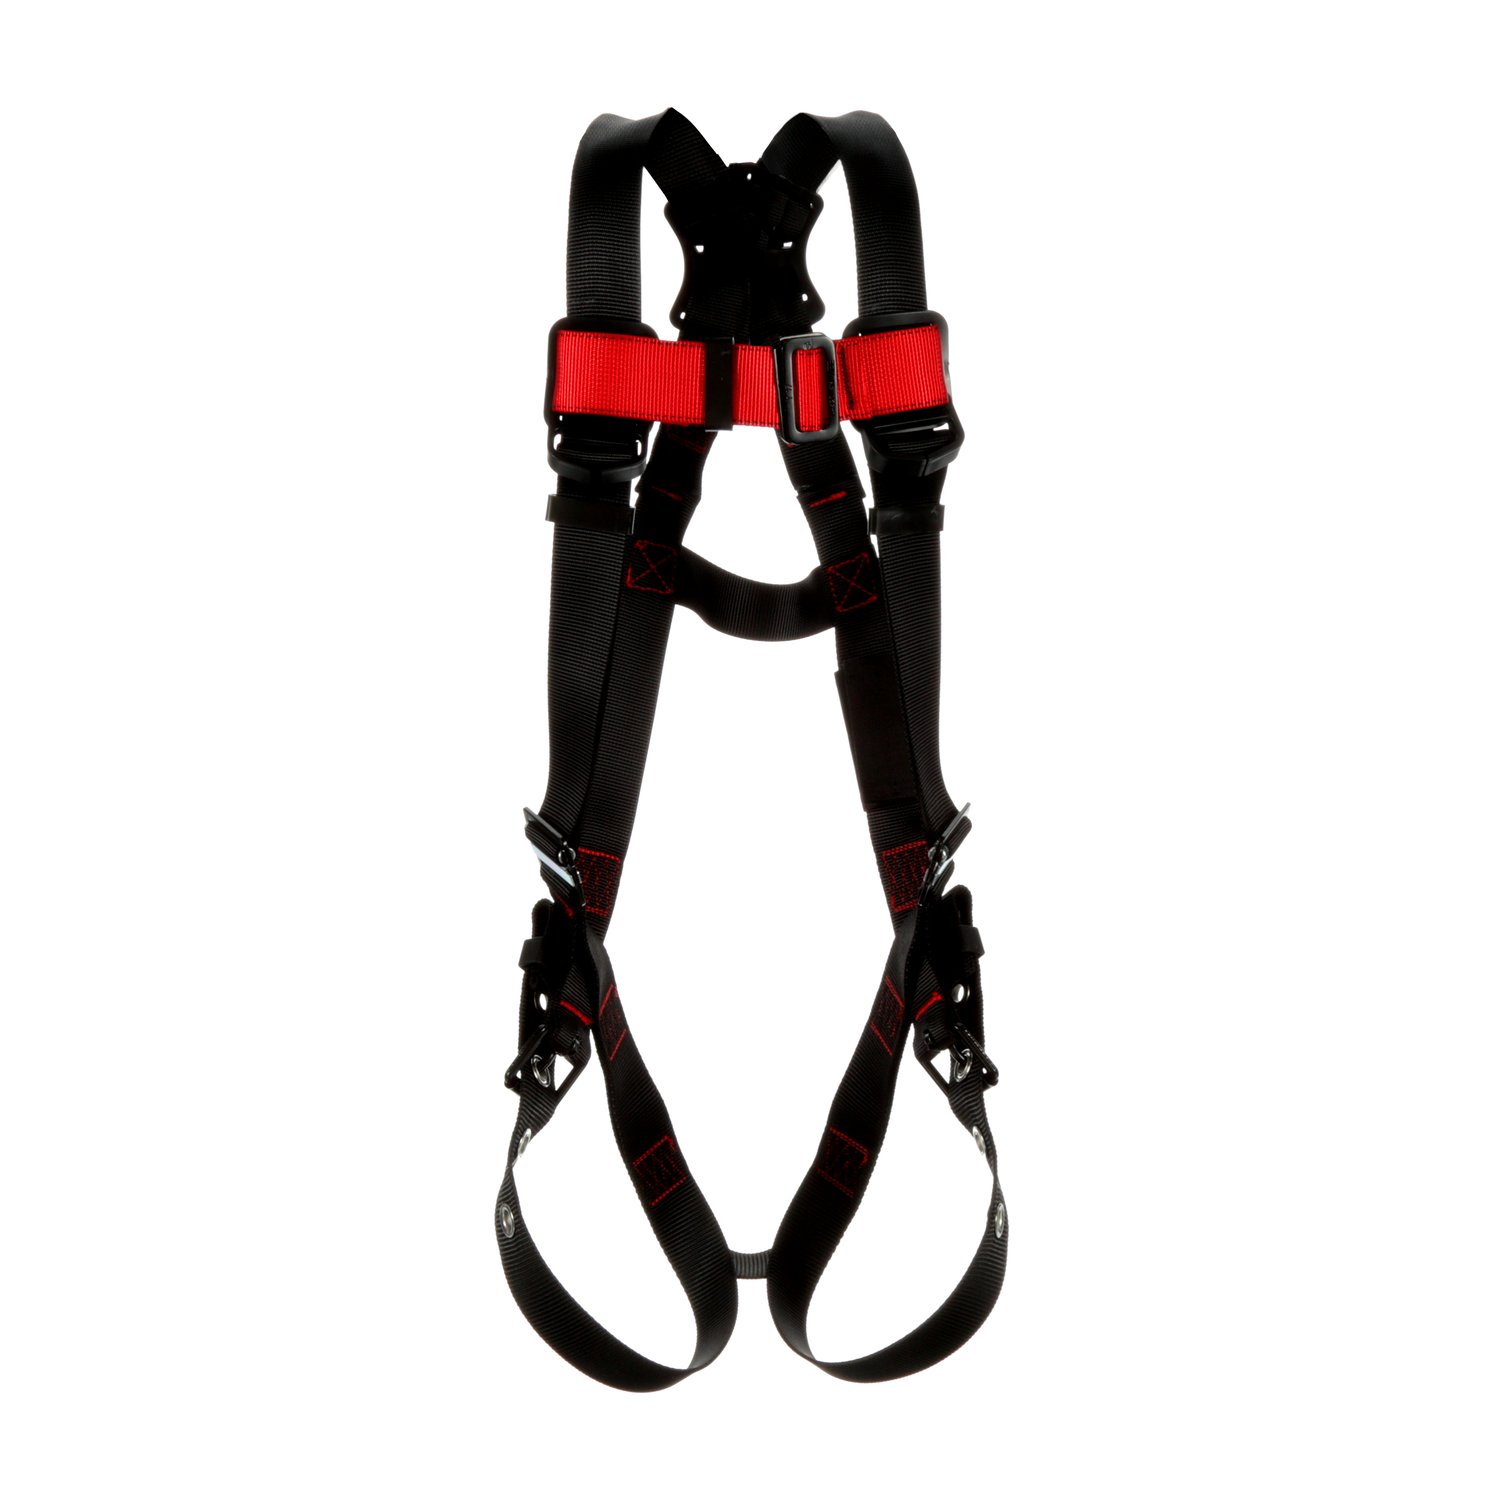 7012816797 - 3M Protecta P200 Vest Safety Harness 1161541, Small